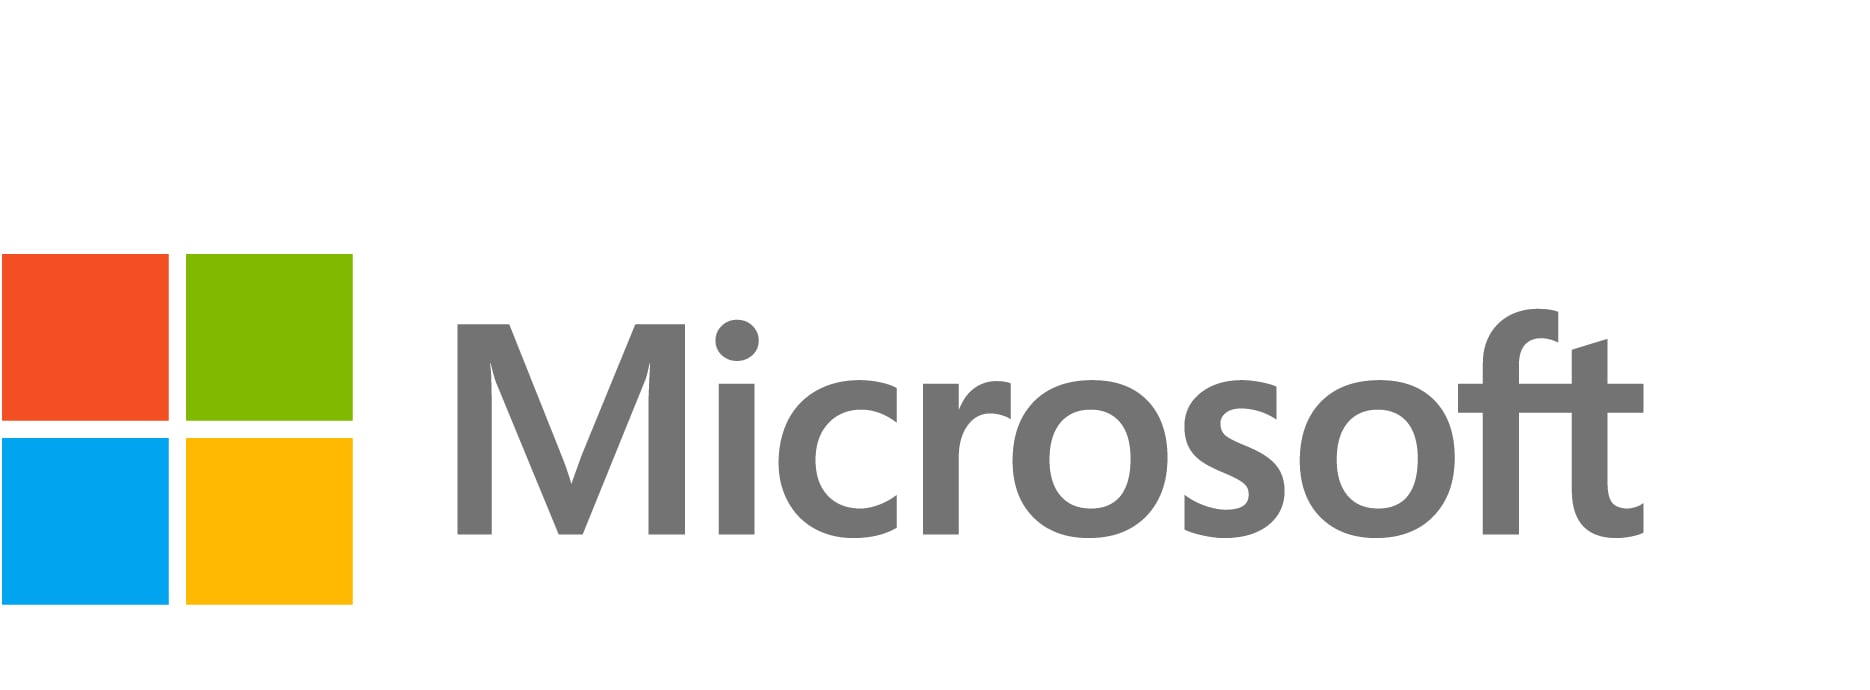 Microsoft System Center Configuration Manager - license & software assurance - 1 operating system environment (OSE)